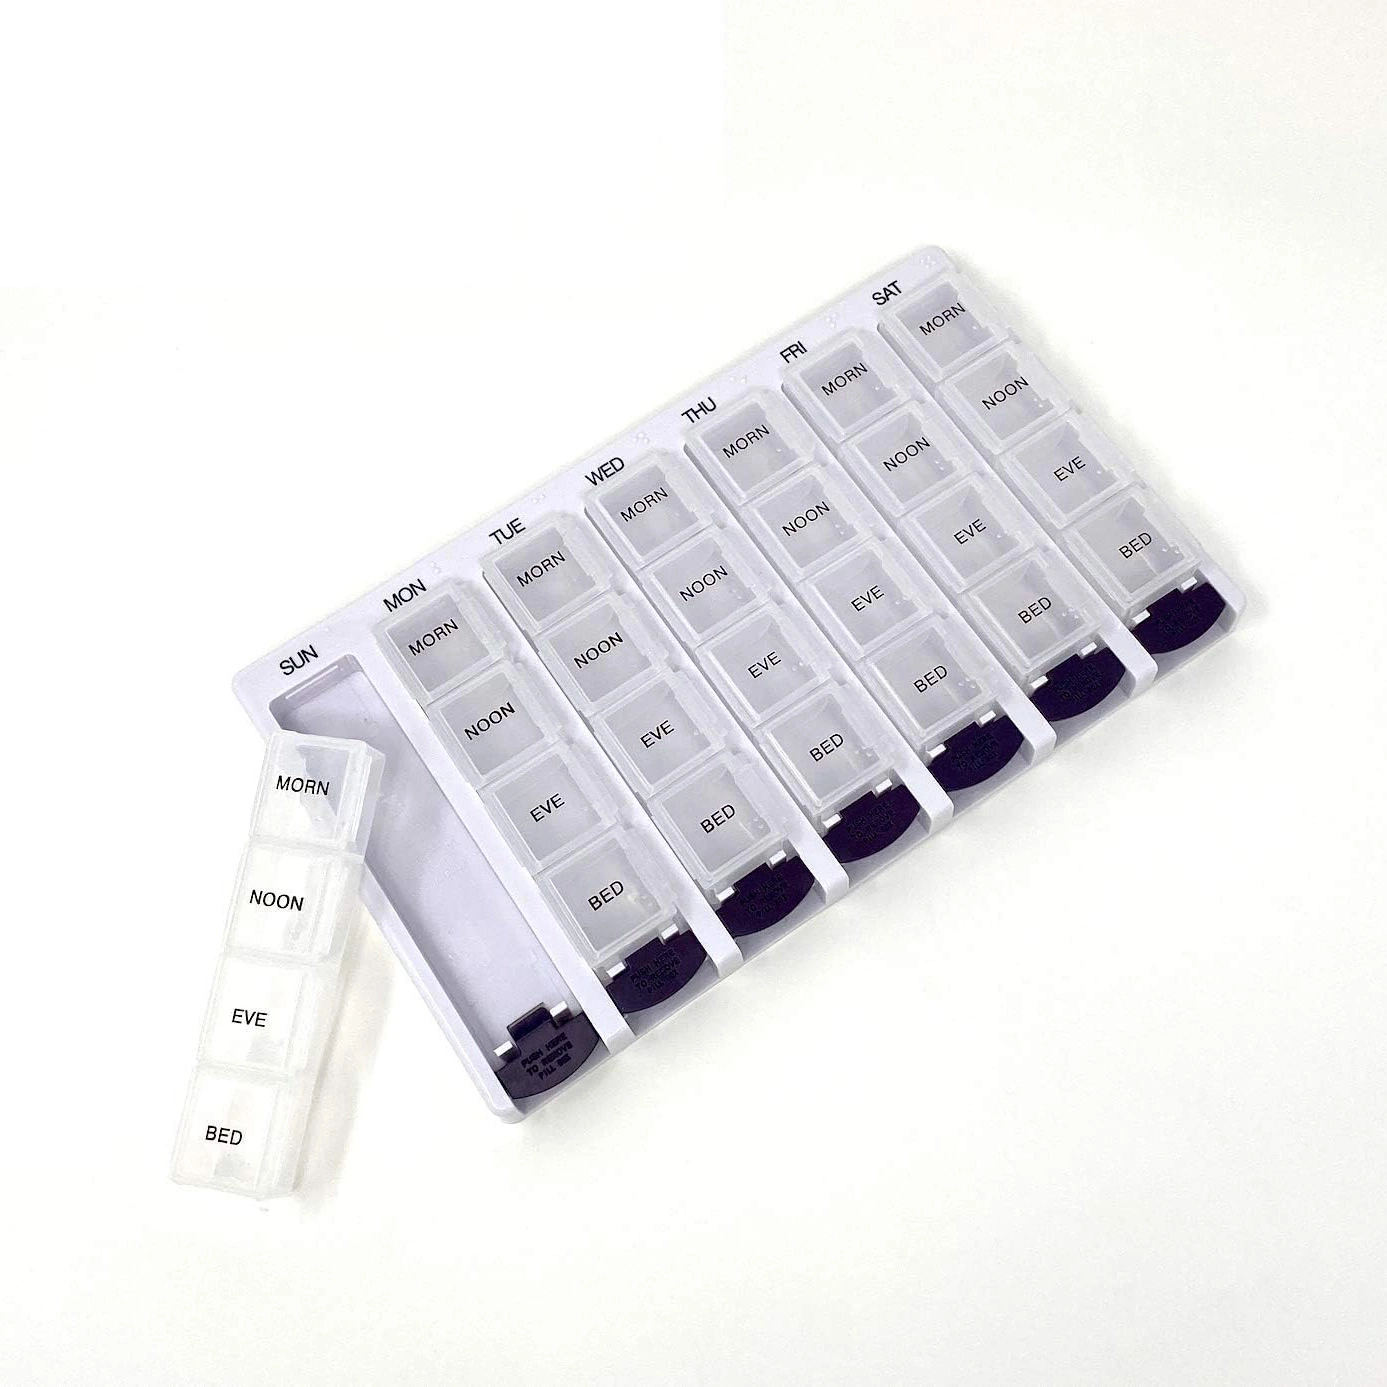 7 Days a Week Pill Box Push Button Spring 28 Compartment Plastic Pill Box Portable Weekly Compartment Pill Organiser